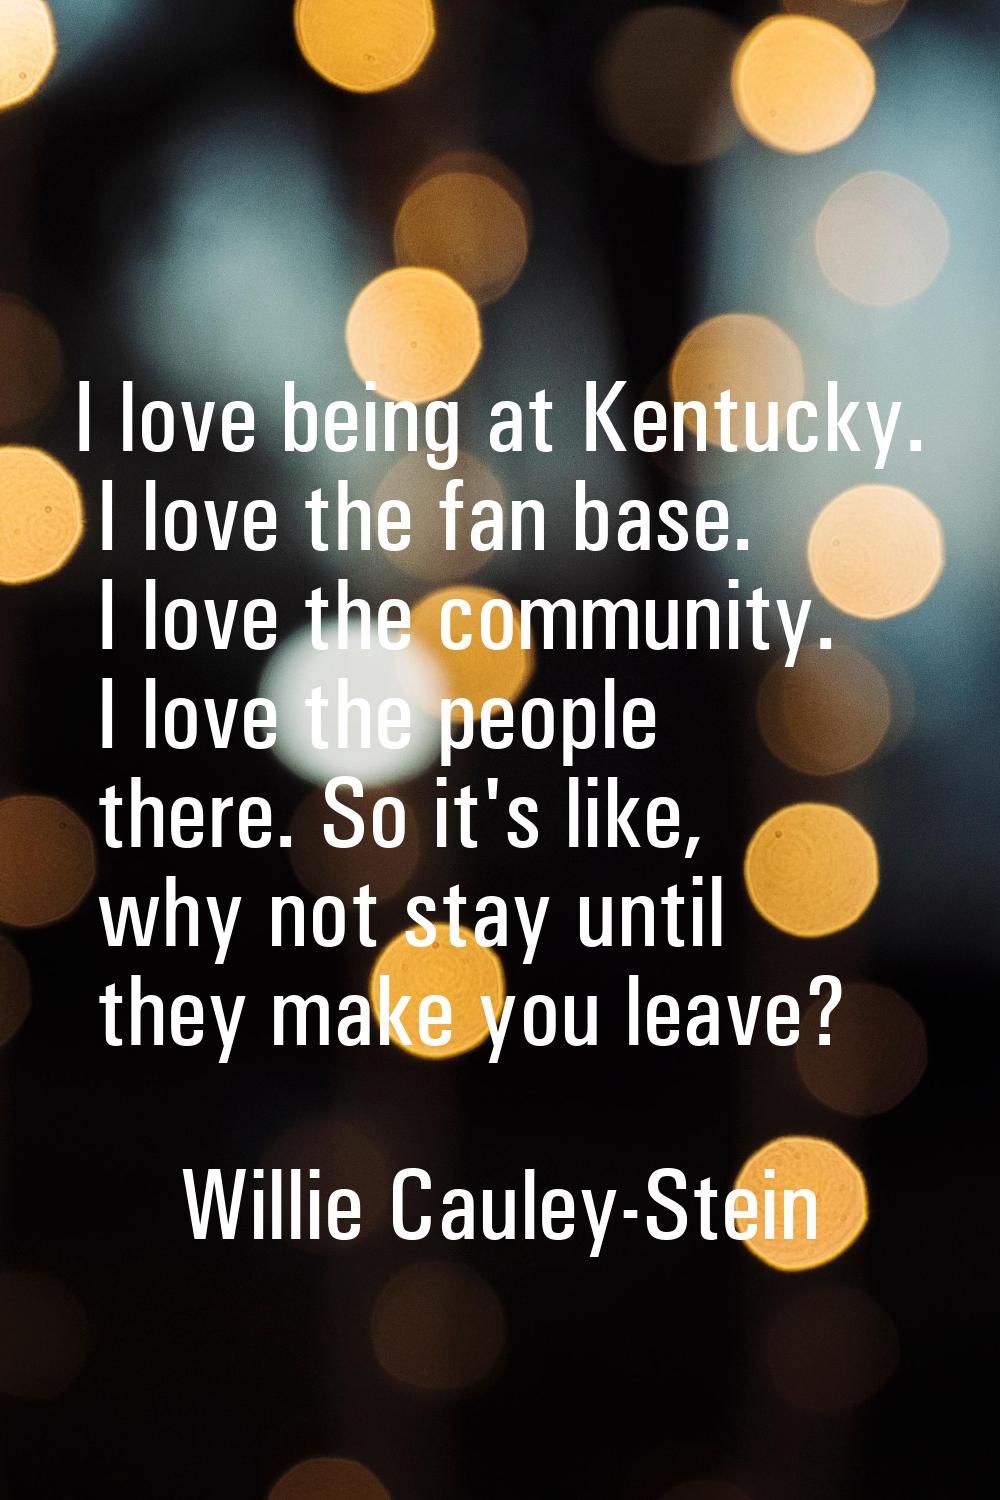 I love being at Kentucky. I love the fan base. I love the community. I love the people there. So it